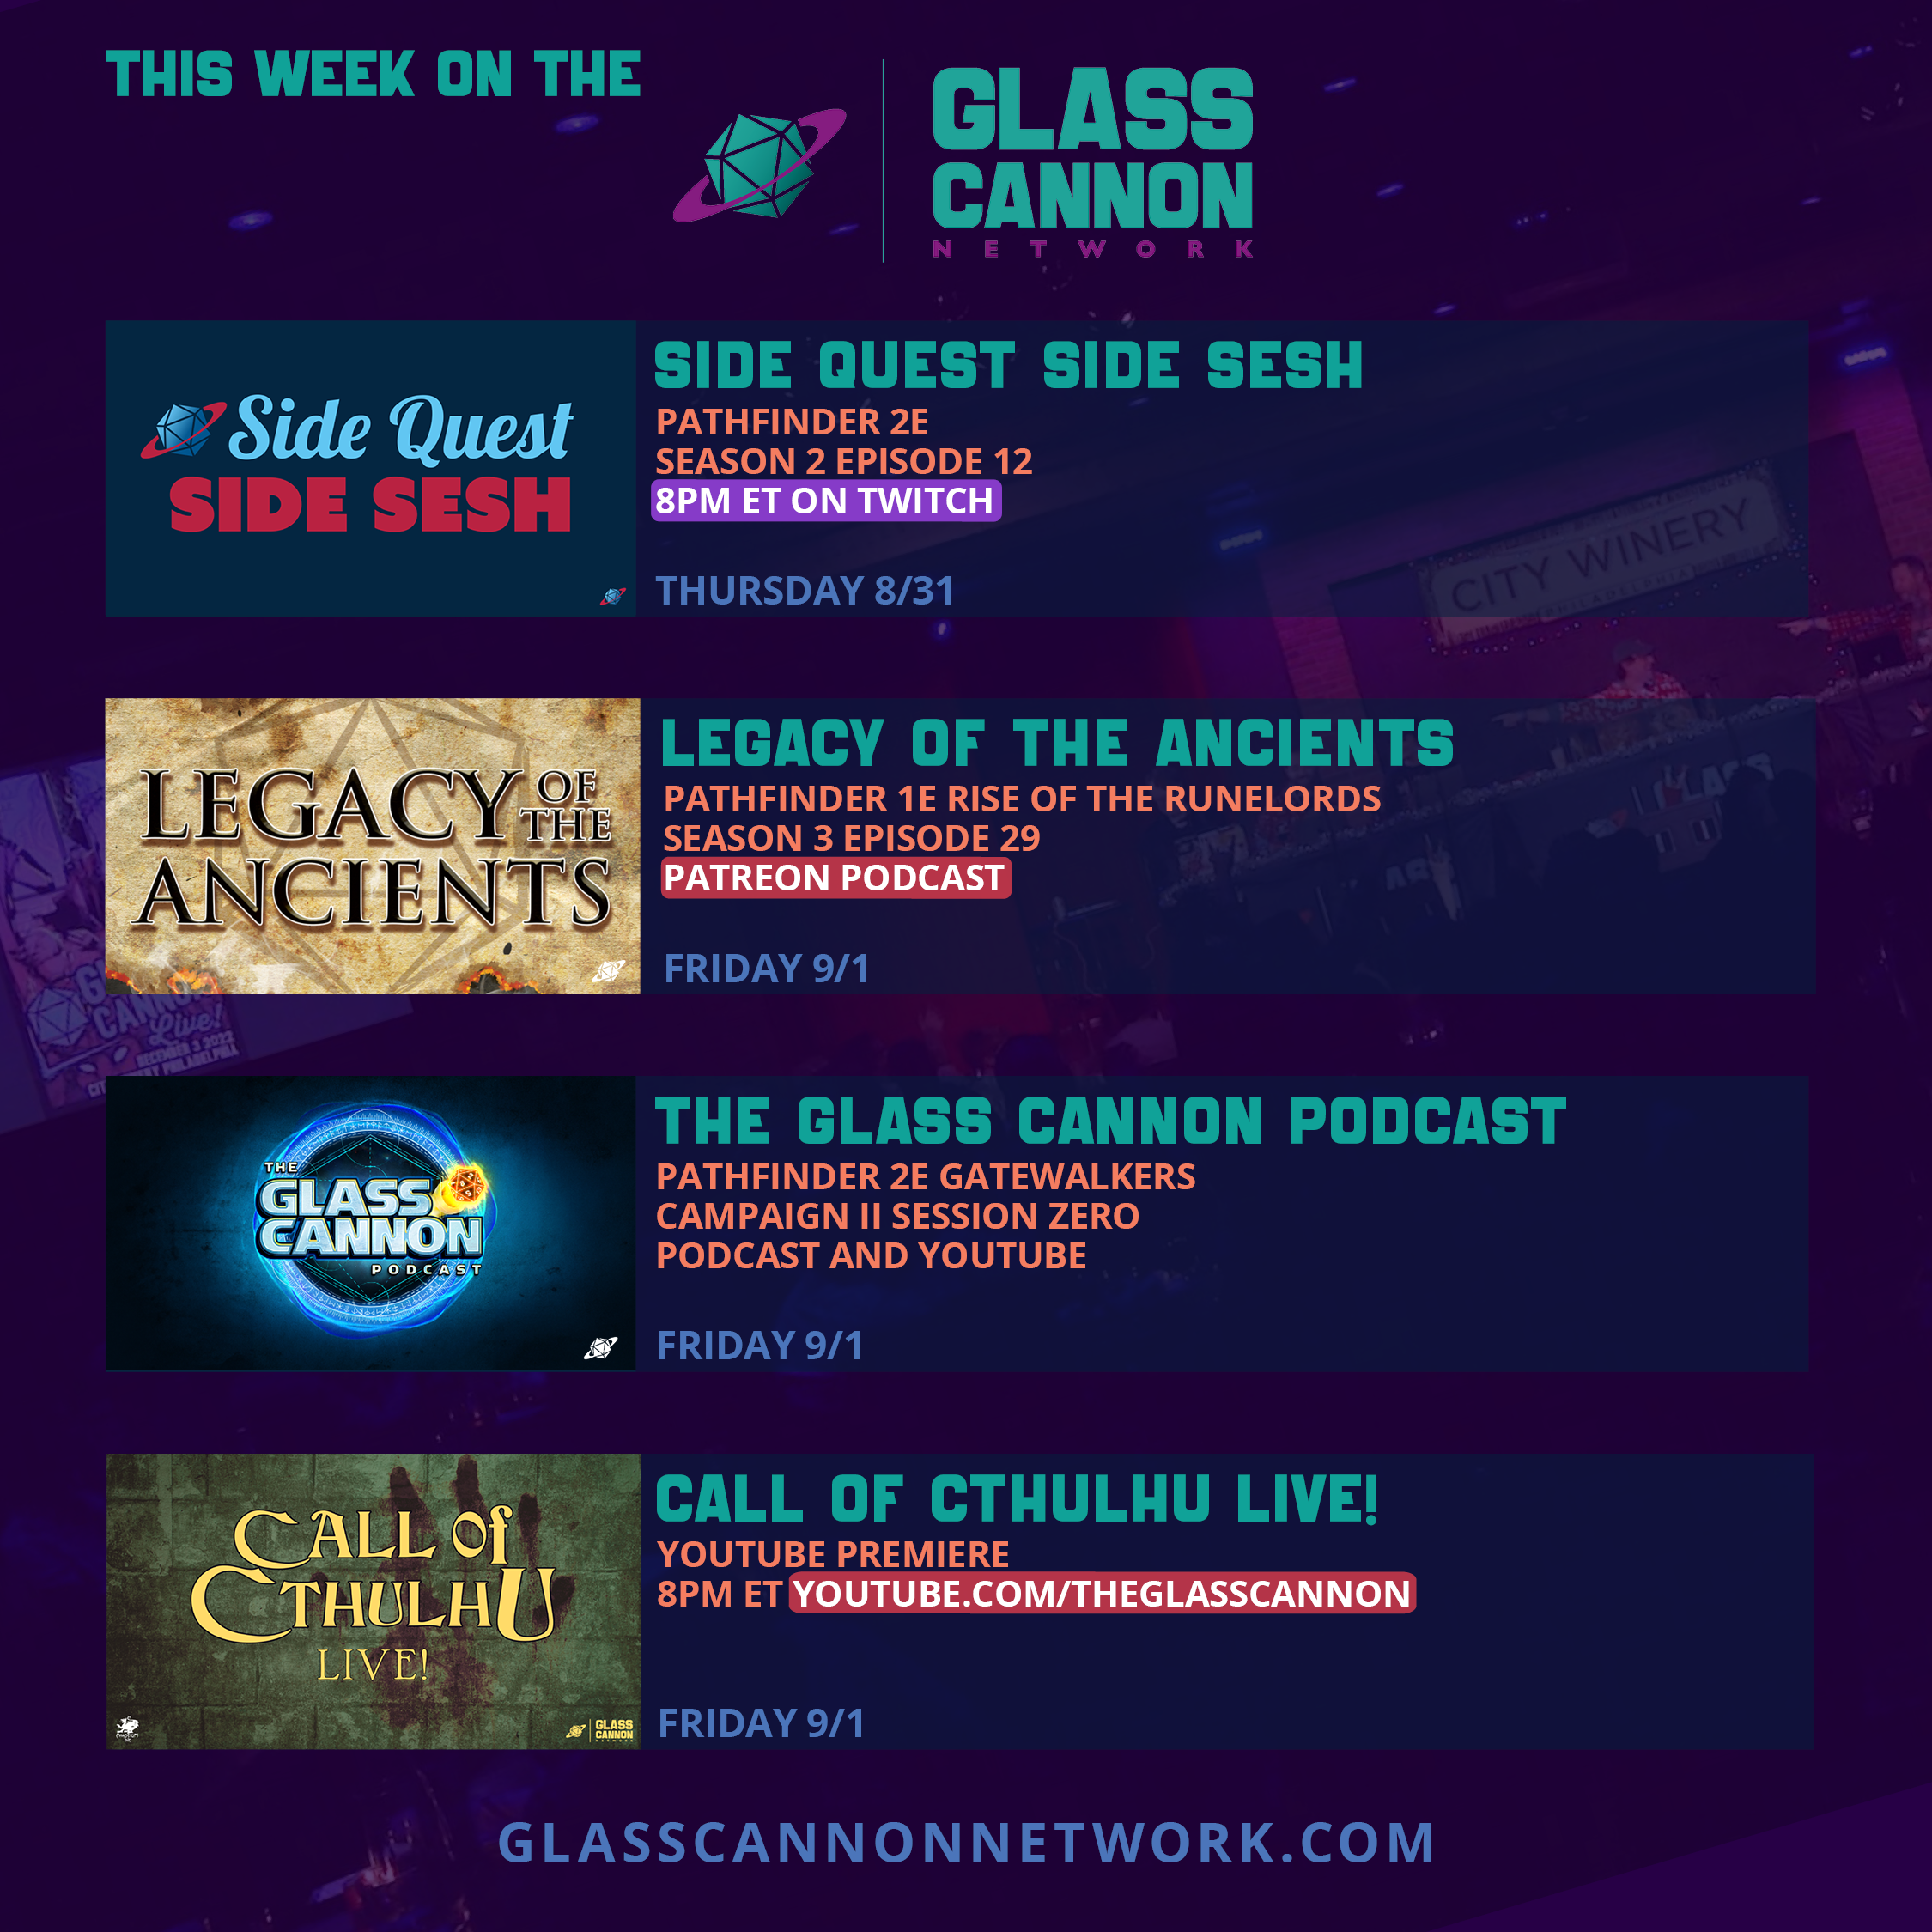 Aug_28_GCN-Weekly Schedule3.png